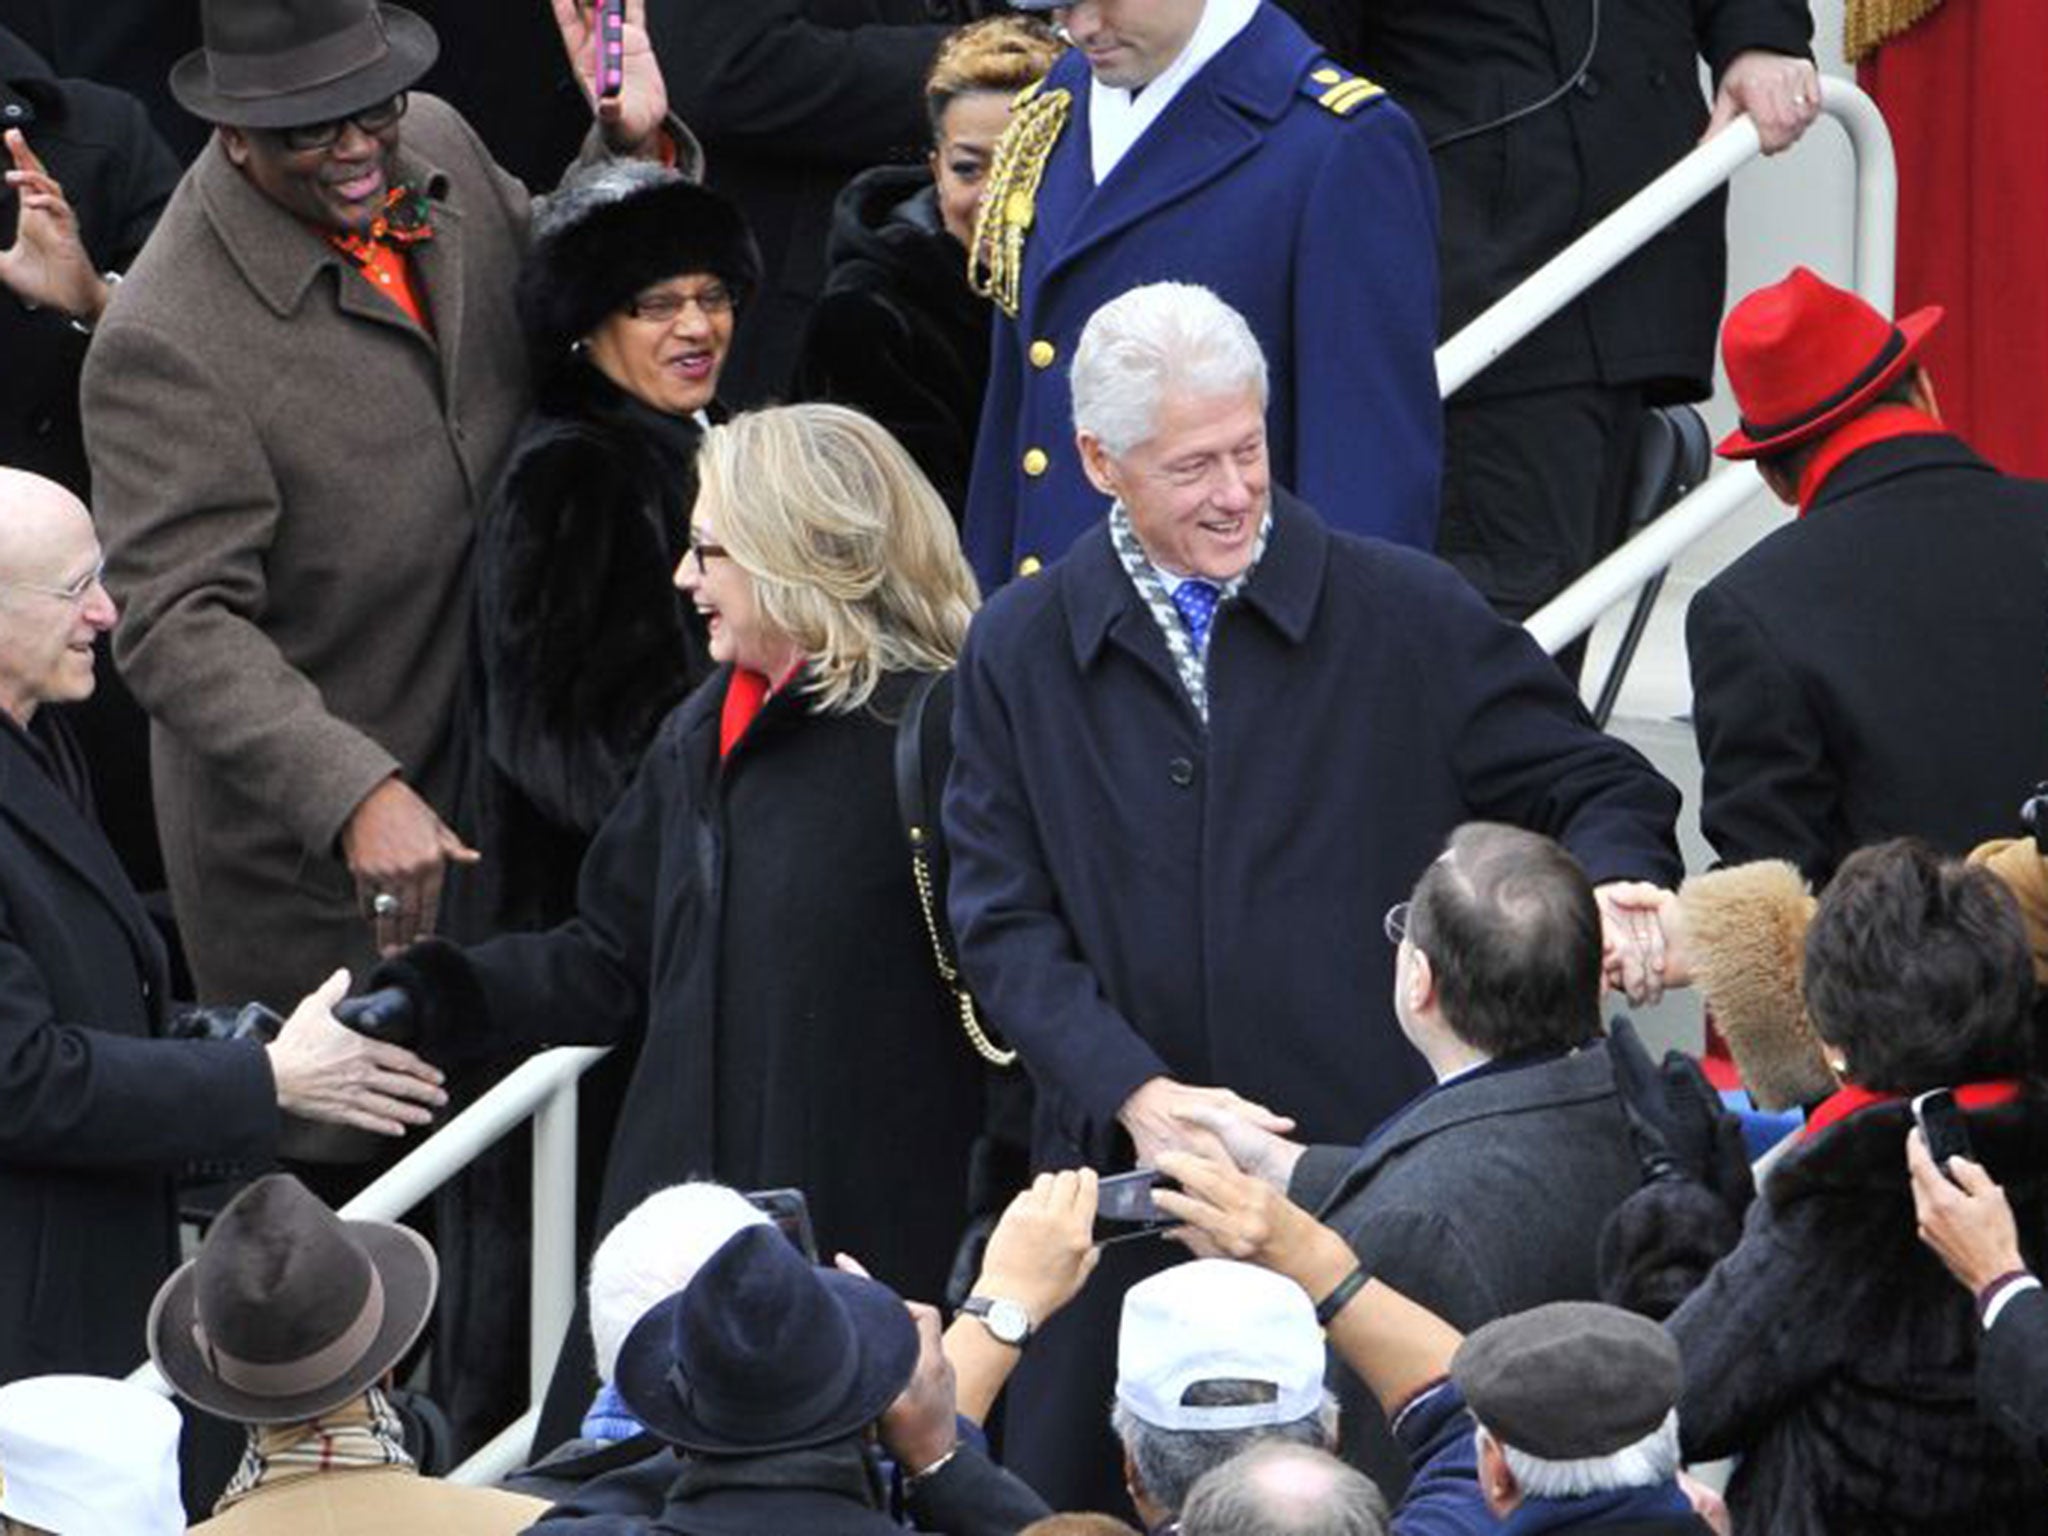 Hillary and Bill Clinton have global appeal and both cash in on that